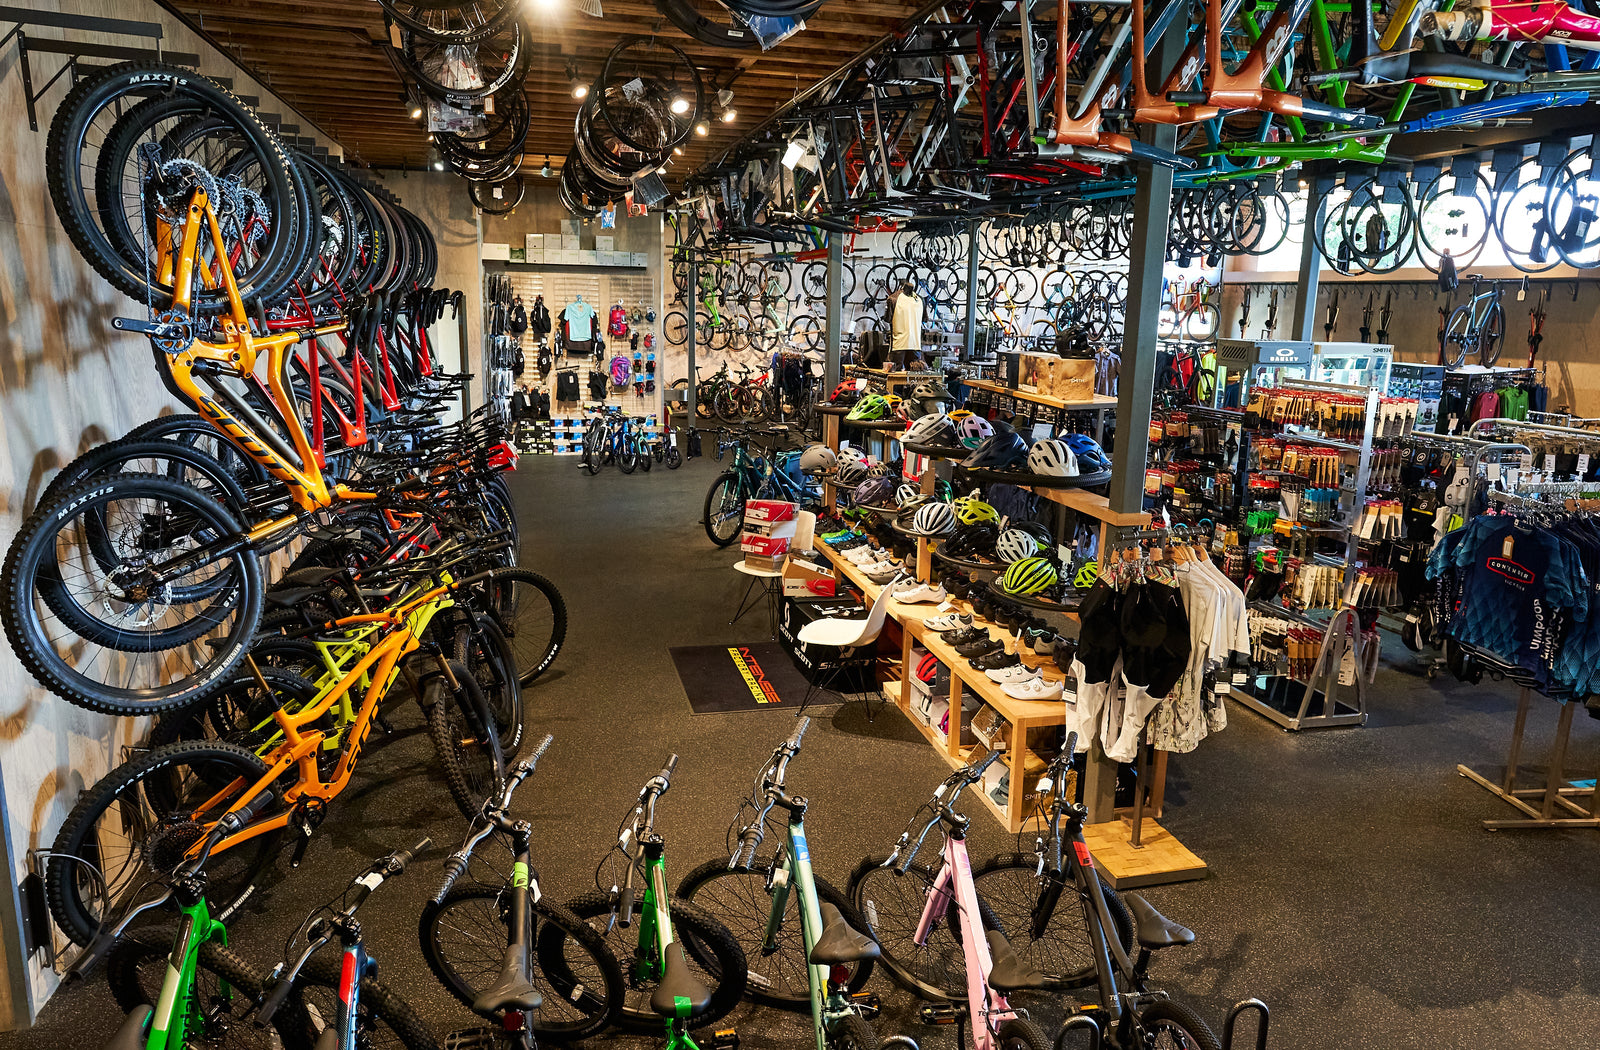 Where Are All the Bicycles and Components? A Bike Shop's Perspective